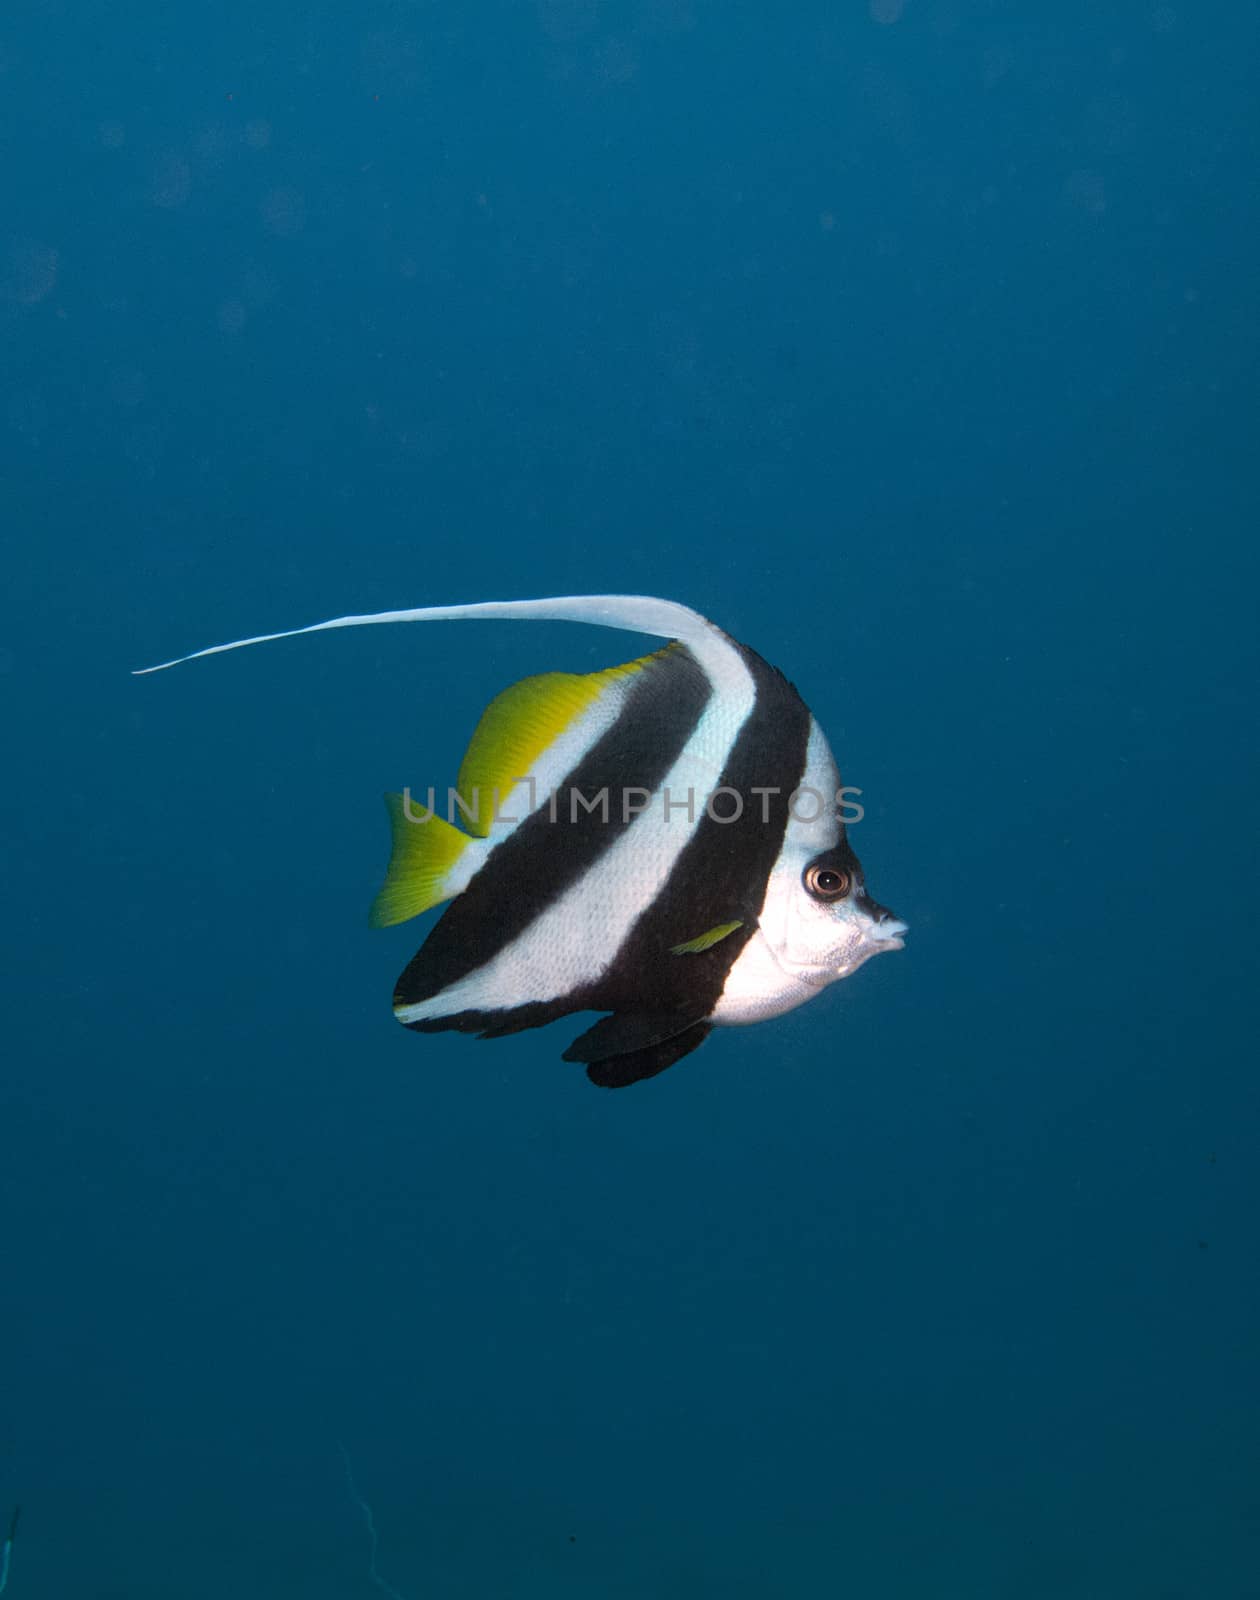 a lone bannerfish swims in the blue